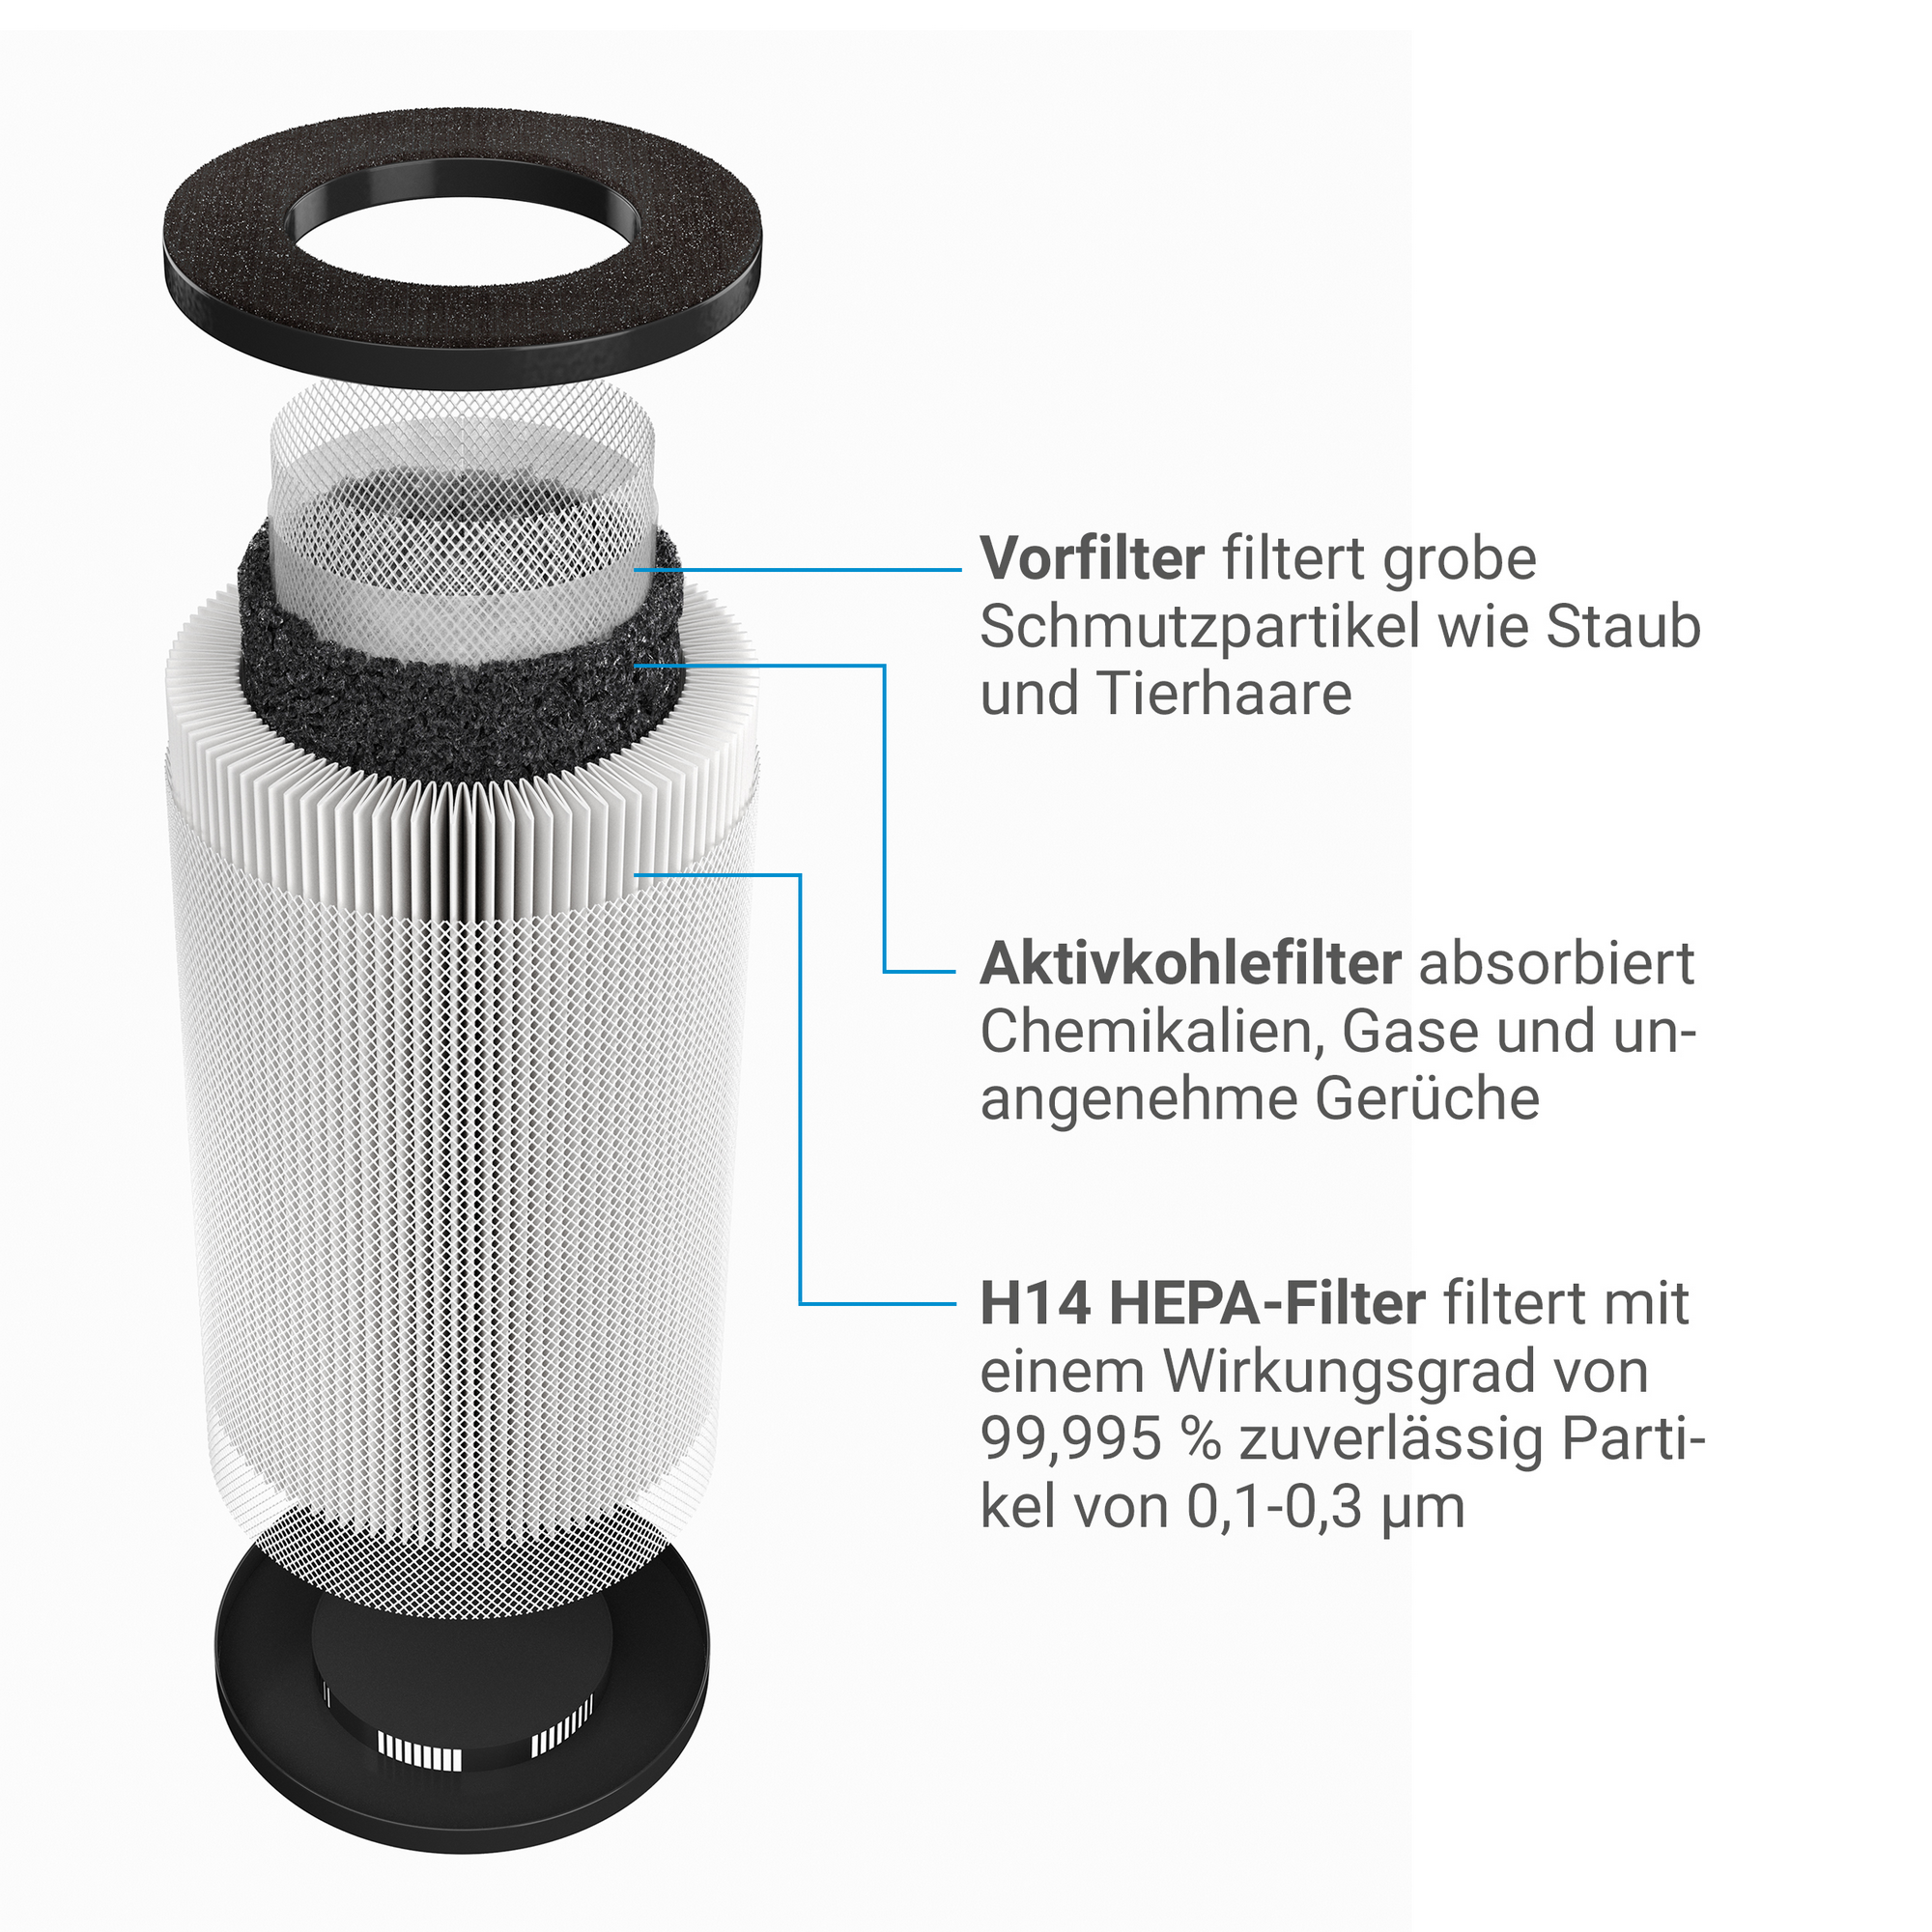 Luftreiniger 'AirCare 4000 VirusEx H14 MultiFilter' mit H14 HEPA-Filter, 455 m³/h + product picture